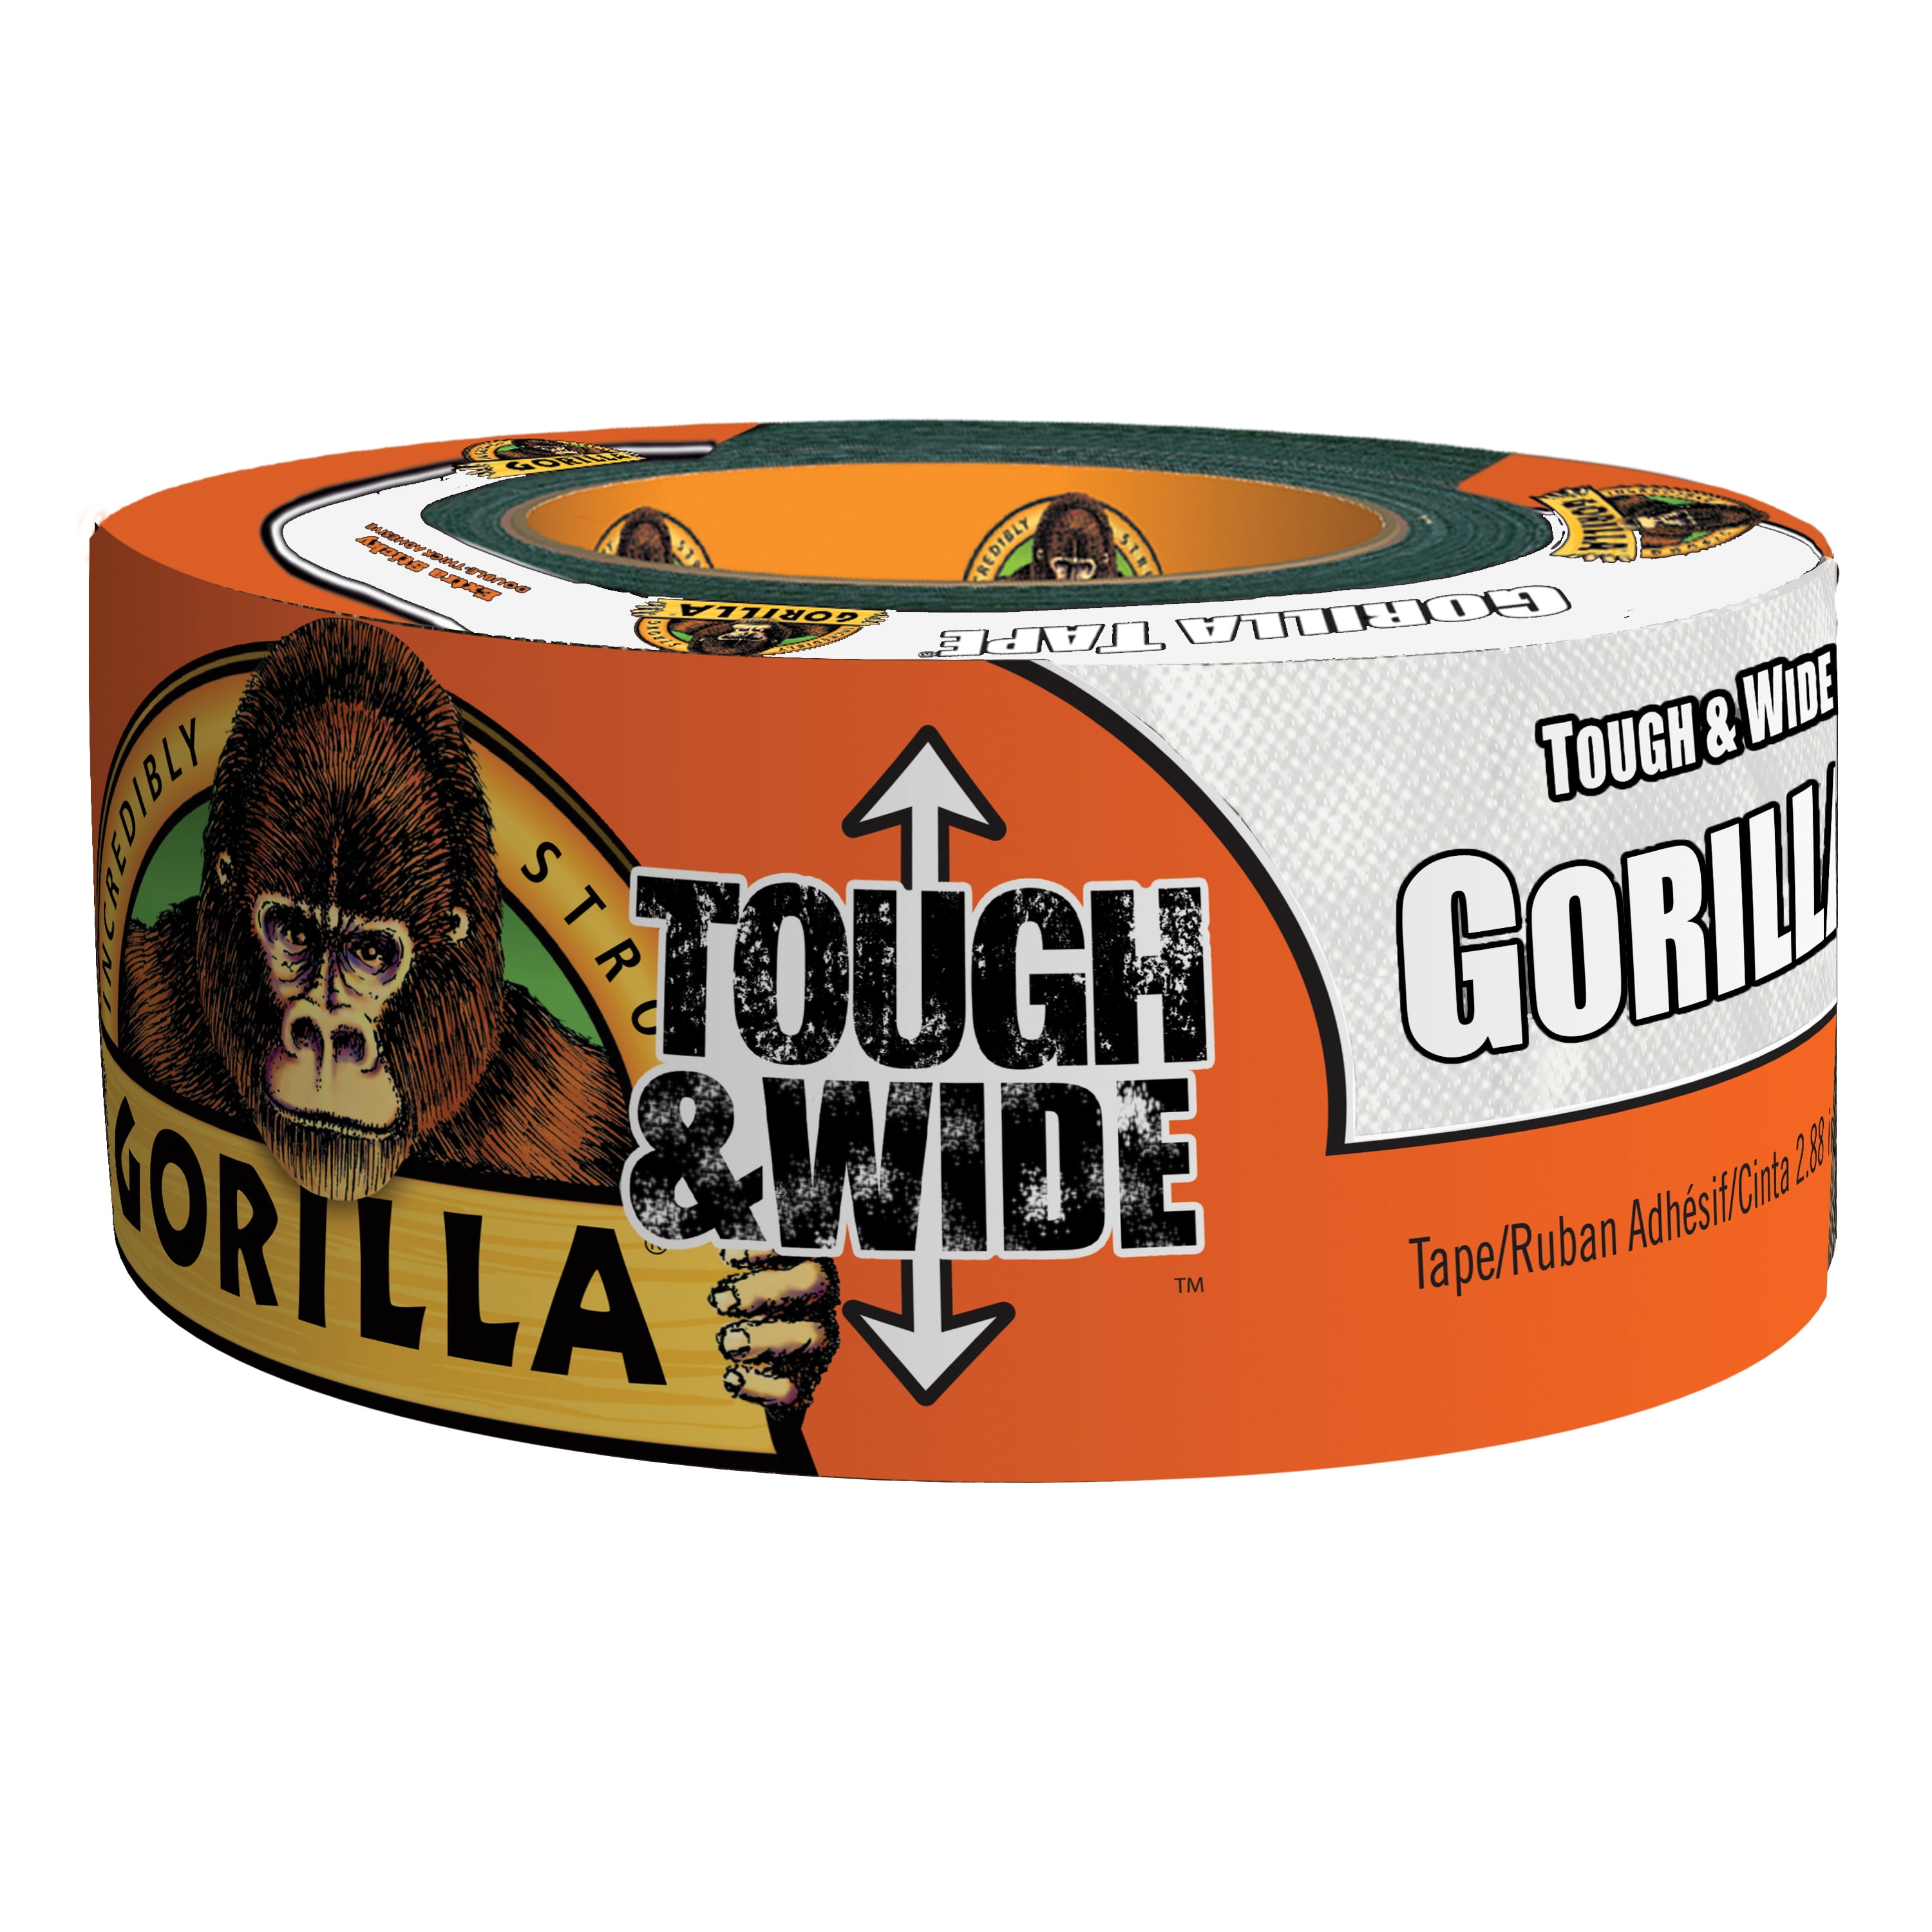 Gorilla White Duct Tape 1.88-in x 10 Yard(s) in the Duct Tape department at